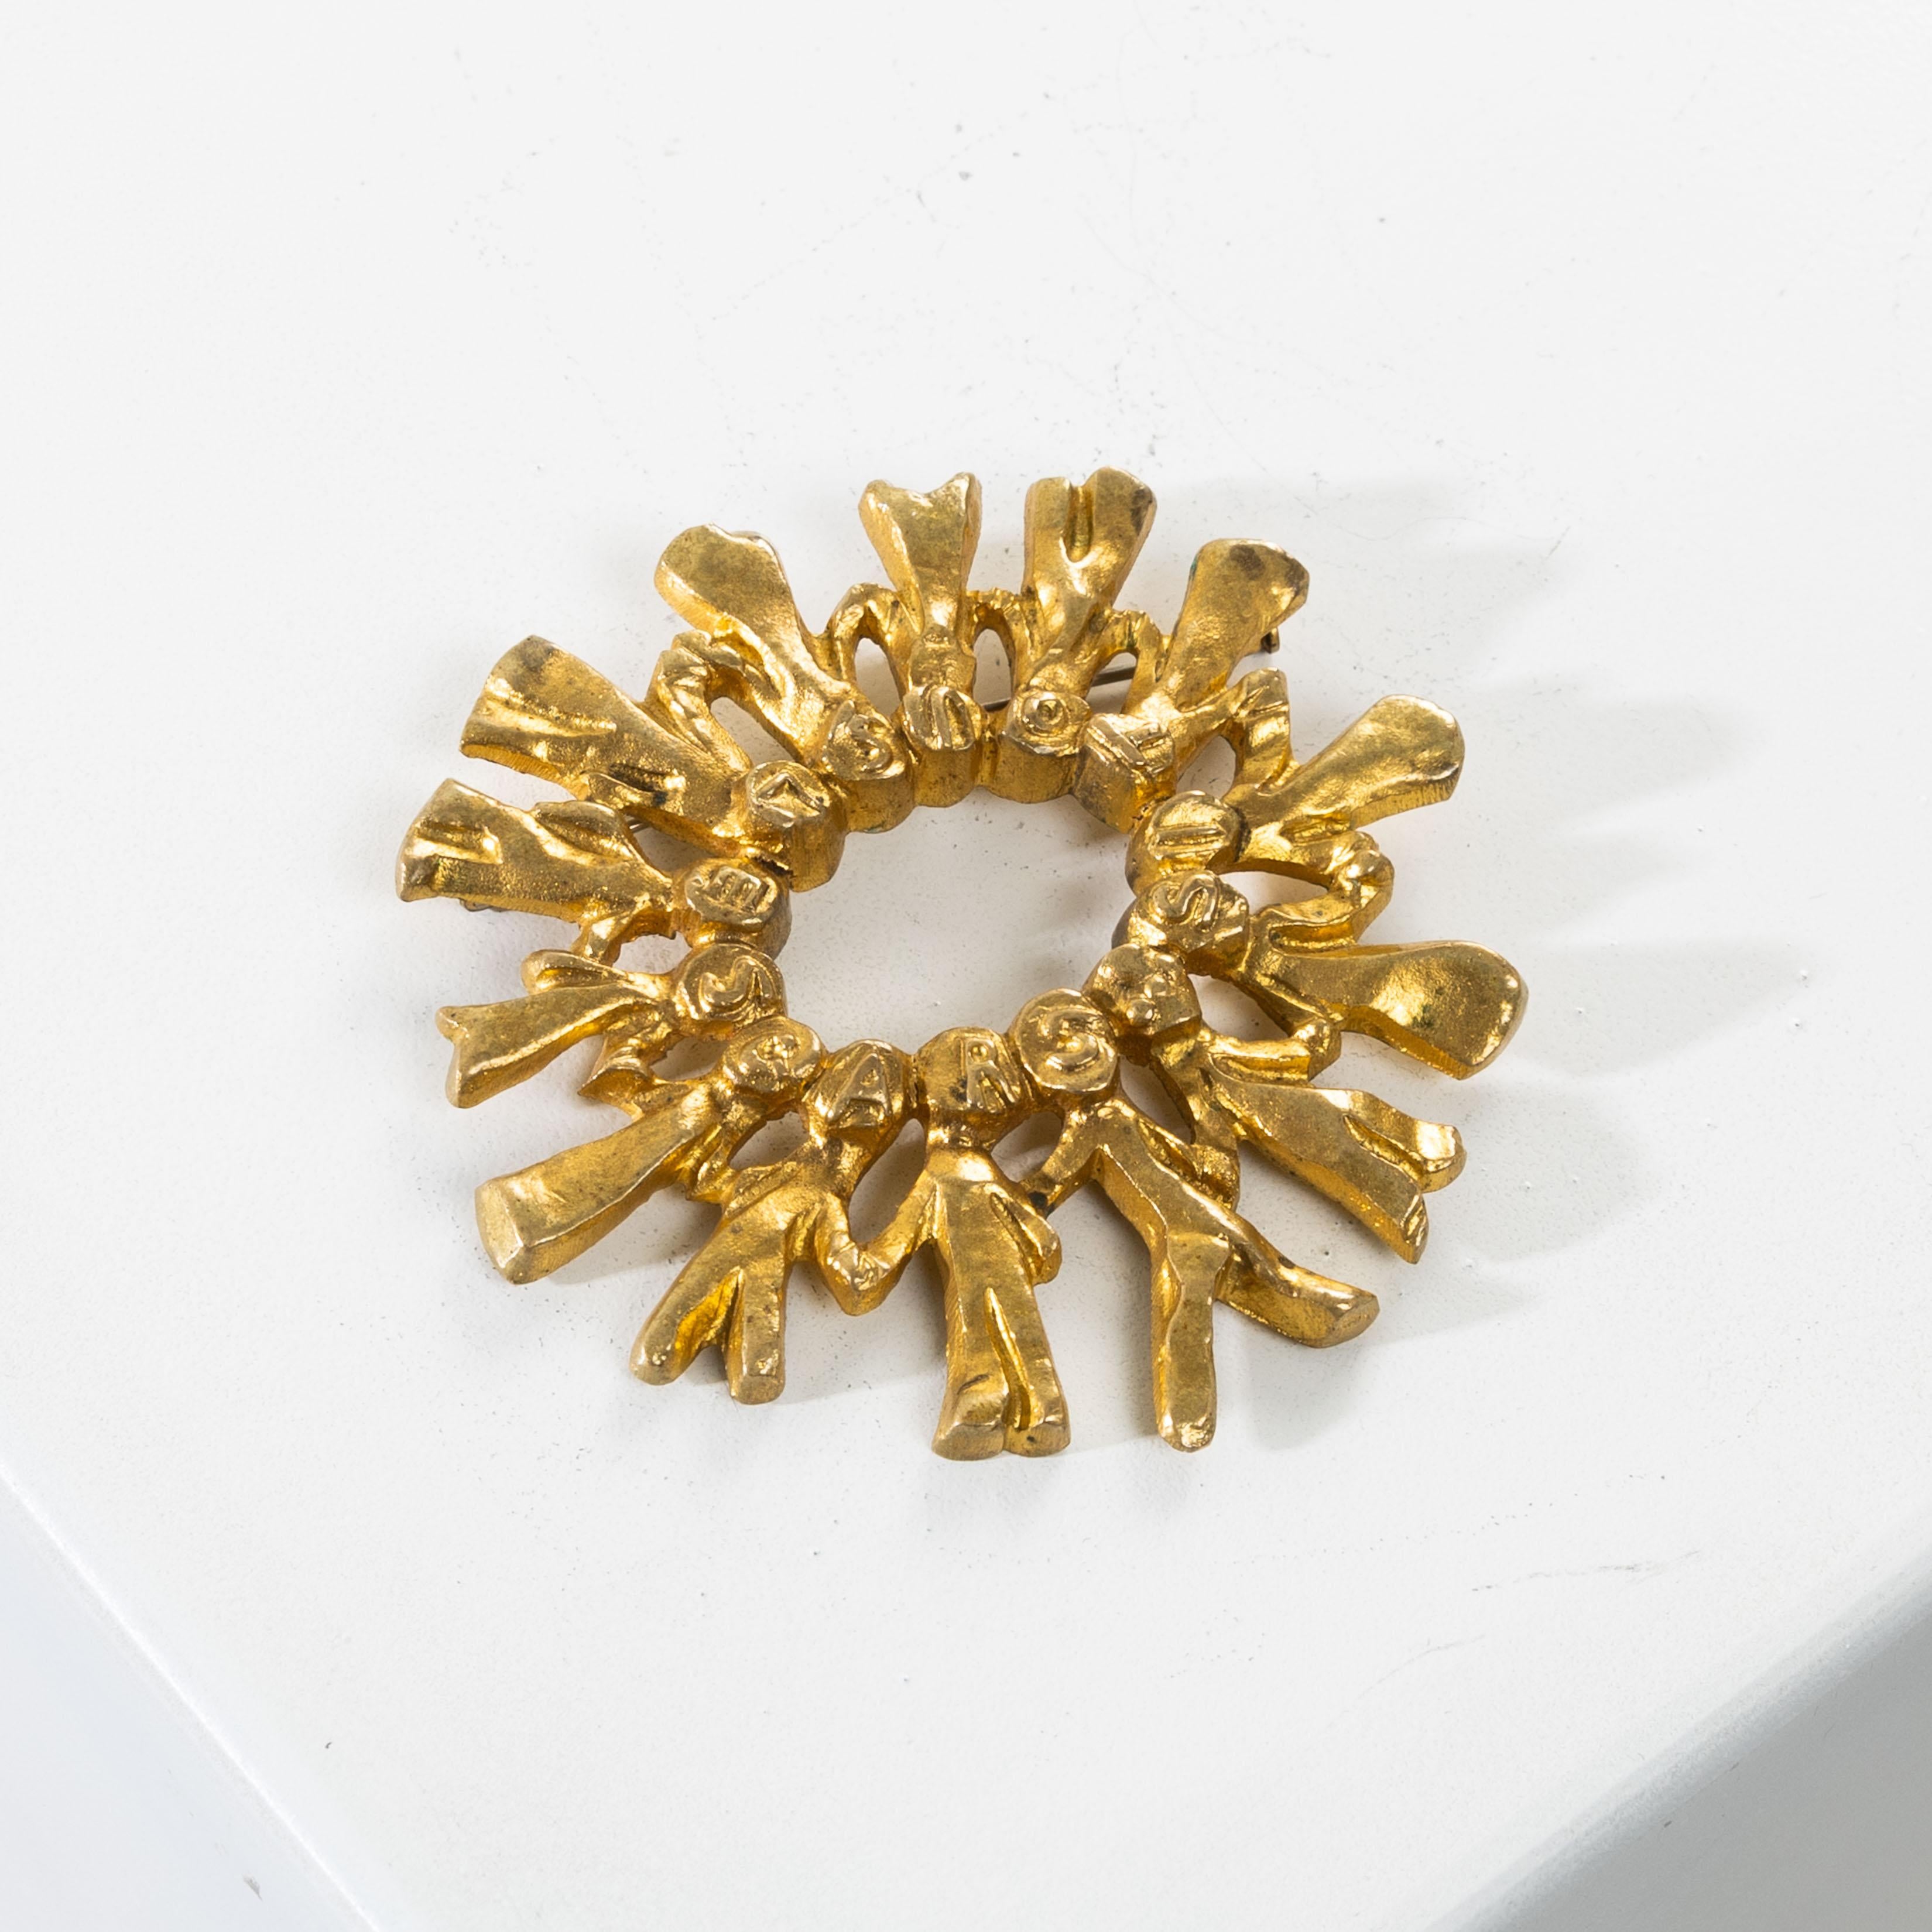 Si tous les gars du monde… (If all the guys in the world…), by Line Vautrin.
Gilt bronze brooch representing a round of 14 children in long dresses.
Based on a stroll (1897) by Paul Fort (1872-1960).
Each child’s head bearing a letter titling the